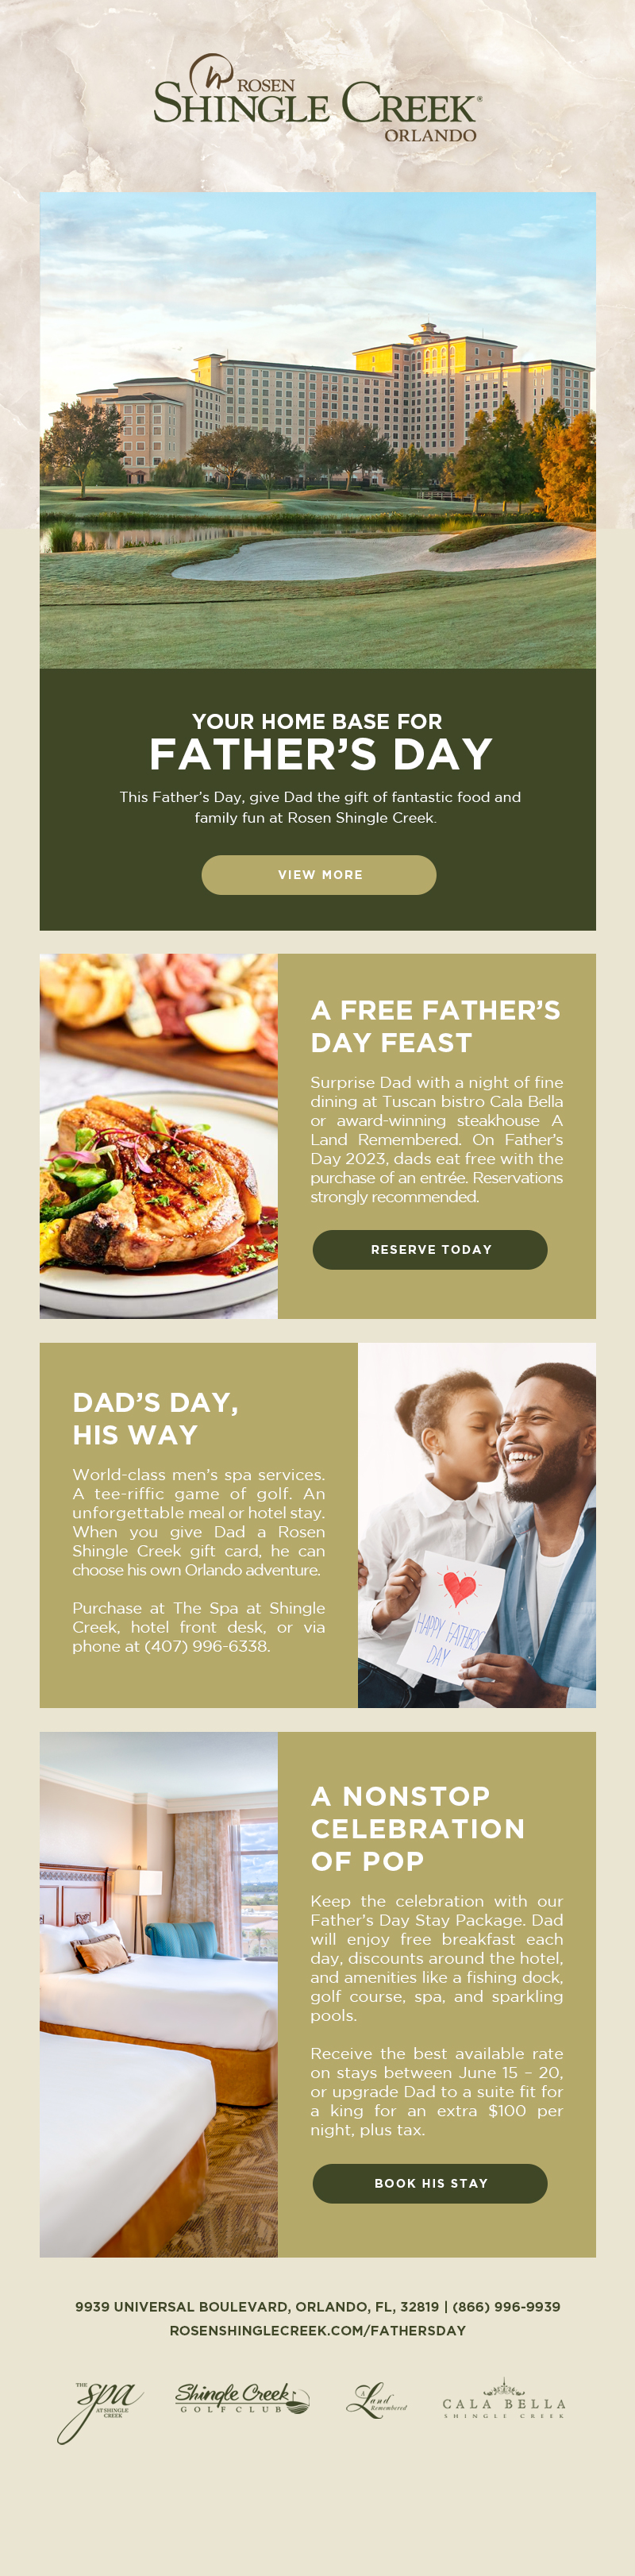 Your Home Base for Father’s Day
		  
This Father’s Day, give Dad the gift of fantastic food and family fun at Rosen Shingle Creek.
		  
A Free Father’s Day Feast
Surprise Dad with a night of fine dining at Tuscan bistro Cala Bella or award-winning steakhouse A Land Remembered. On Father’s Day 2023, dads eat free with the purchase of an entrée. Reservations strongly recommended.
		  
Dad’s Day, His Way
World-class men’s spa services. A tee-riffic game of golf. An unforgettable meal or hotel stay. When you give Dad a Rosen Shingle Creek gift card, he can choose his own Orlando adventure. 

Purchase at The Spa at Shingle Creek, hotel front desk, or via phone at (407) 996-6338.

A Nonstop Celebration of Pop
Keep the celebration with our Father’s Day Stay Package. Dad will enjoy free breakfast each day, discounts around the hotel, and amenities like a fishing dock, golf course, spa, and sparkling pools.

Receive the best available rate on stays between June 15 – 20, or upgrade Dad to a suite fit for a king for an extra $100 per night, plus tax.
		  
9939 Universal Boulevard, Orlando, FL, 32819 | (866) 996-9939
RosenShingleCreek.com/FathersDay